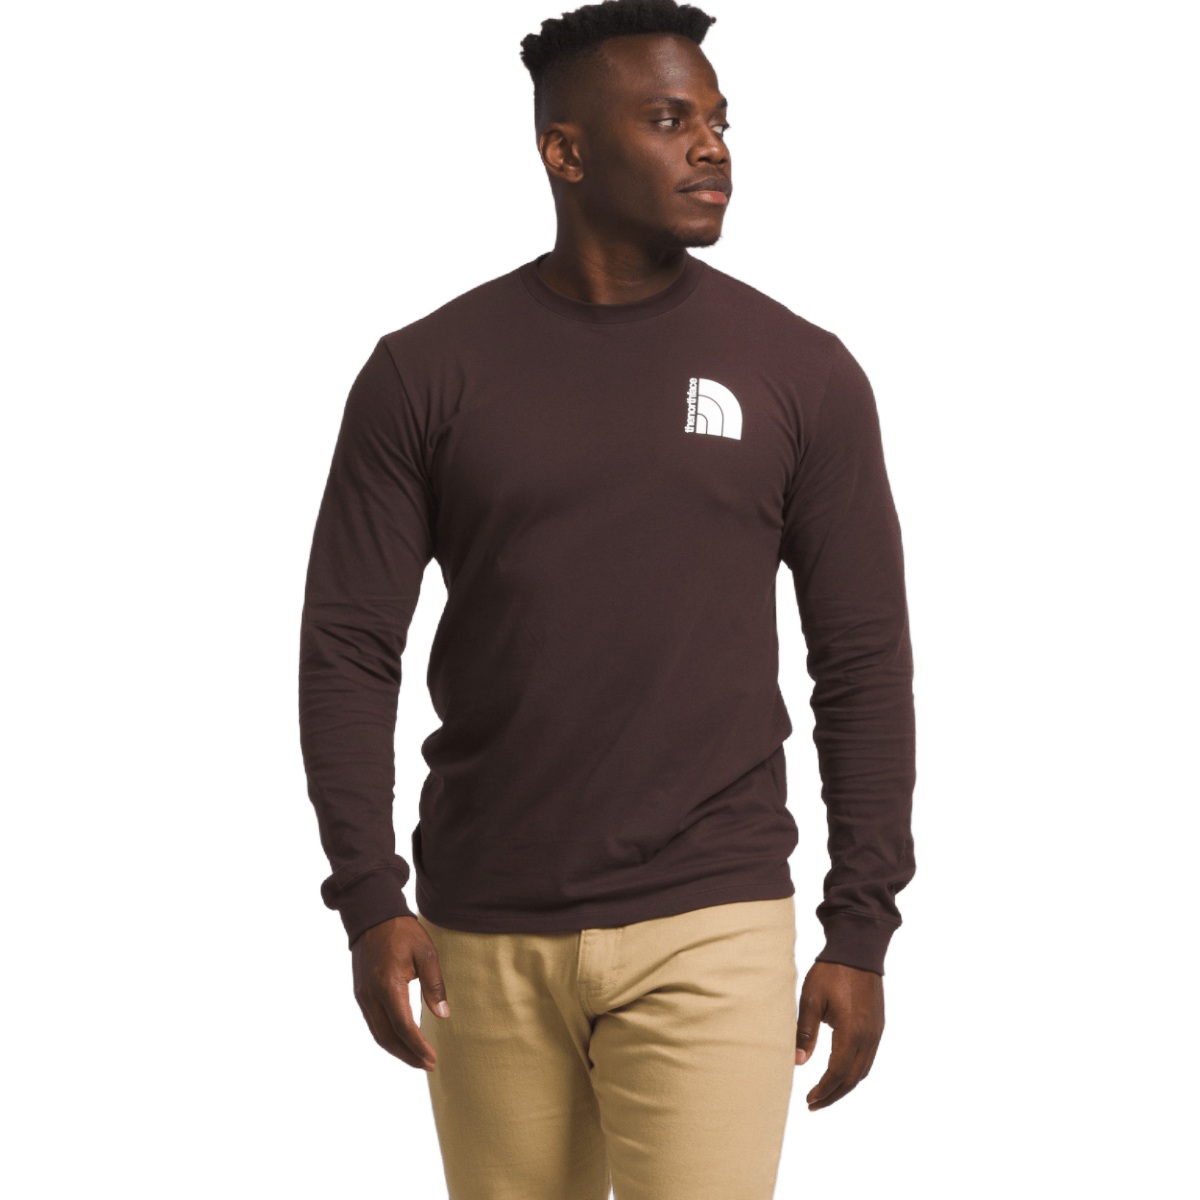 The North Face Jumbo Half Dome Short-Sleeve T-Shirt for Men